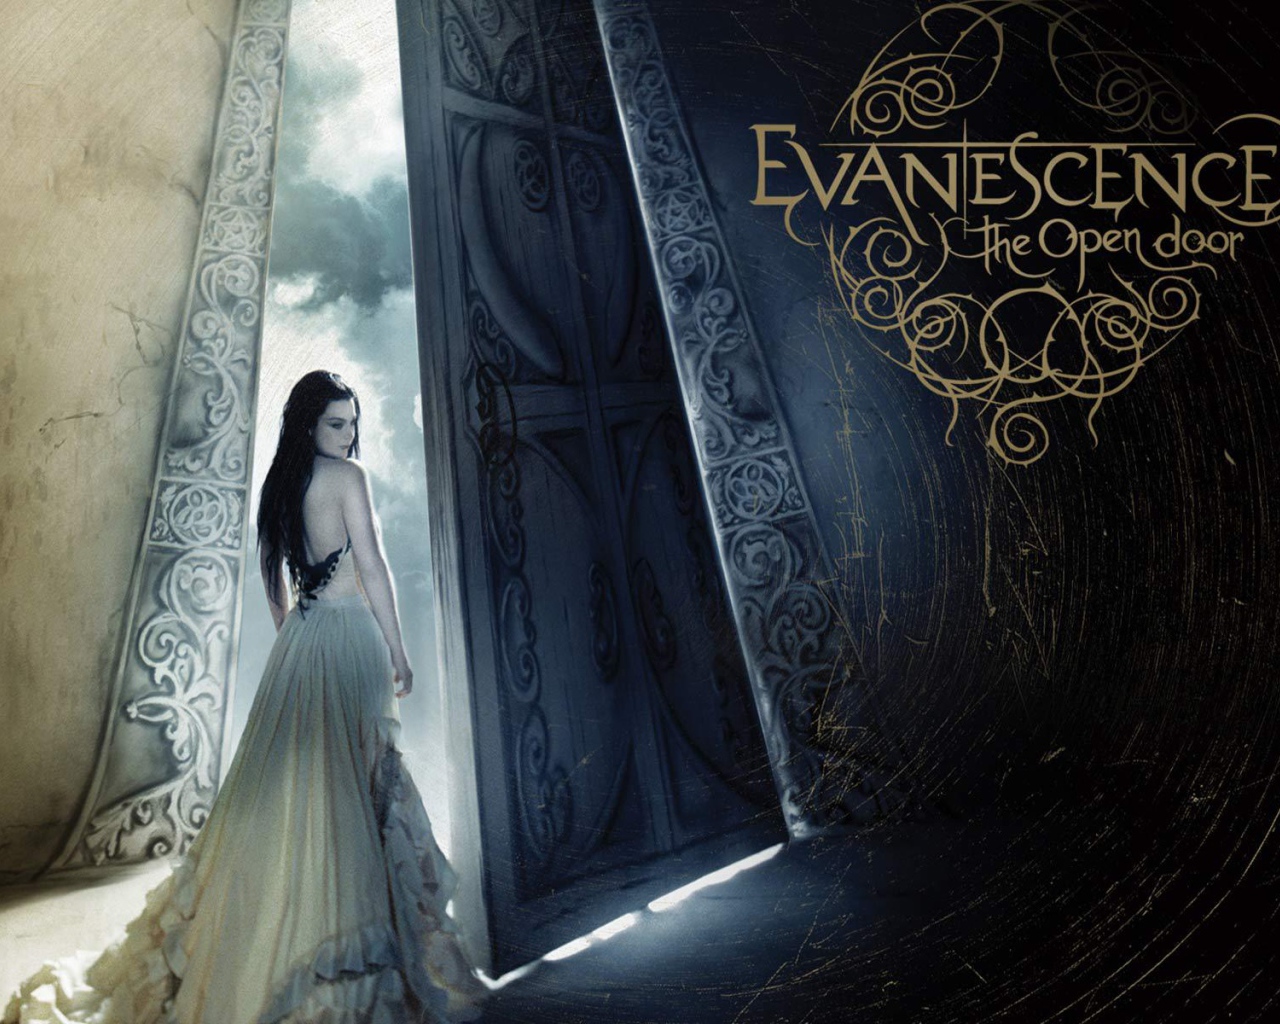 The poster group Evanescence